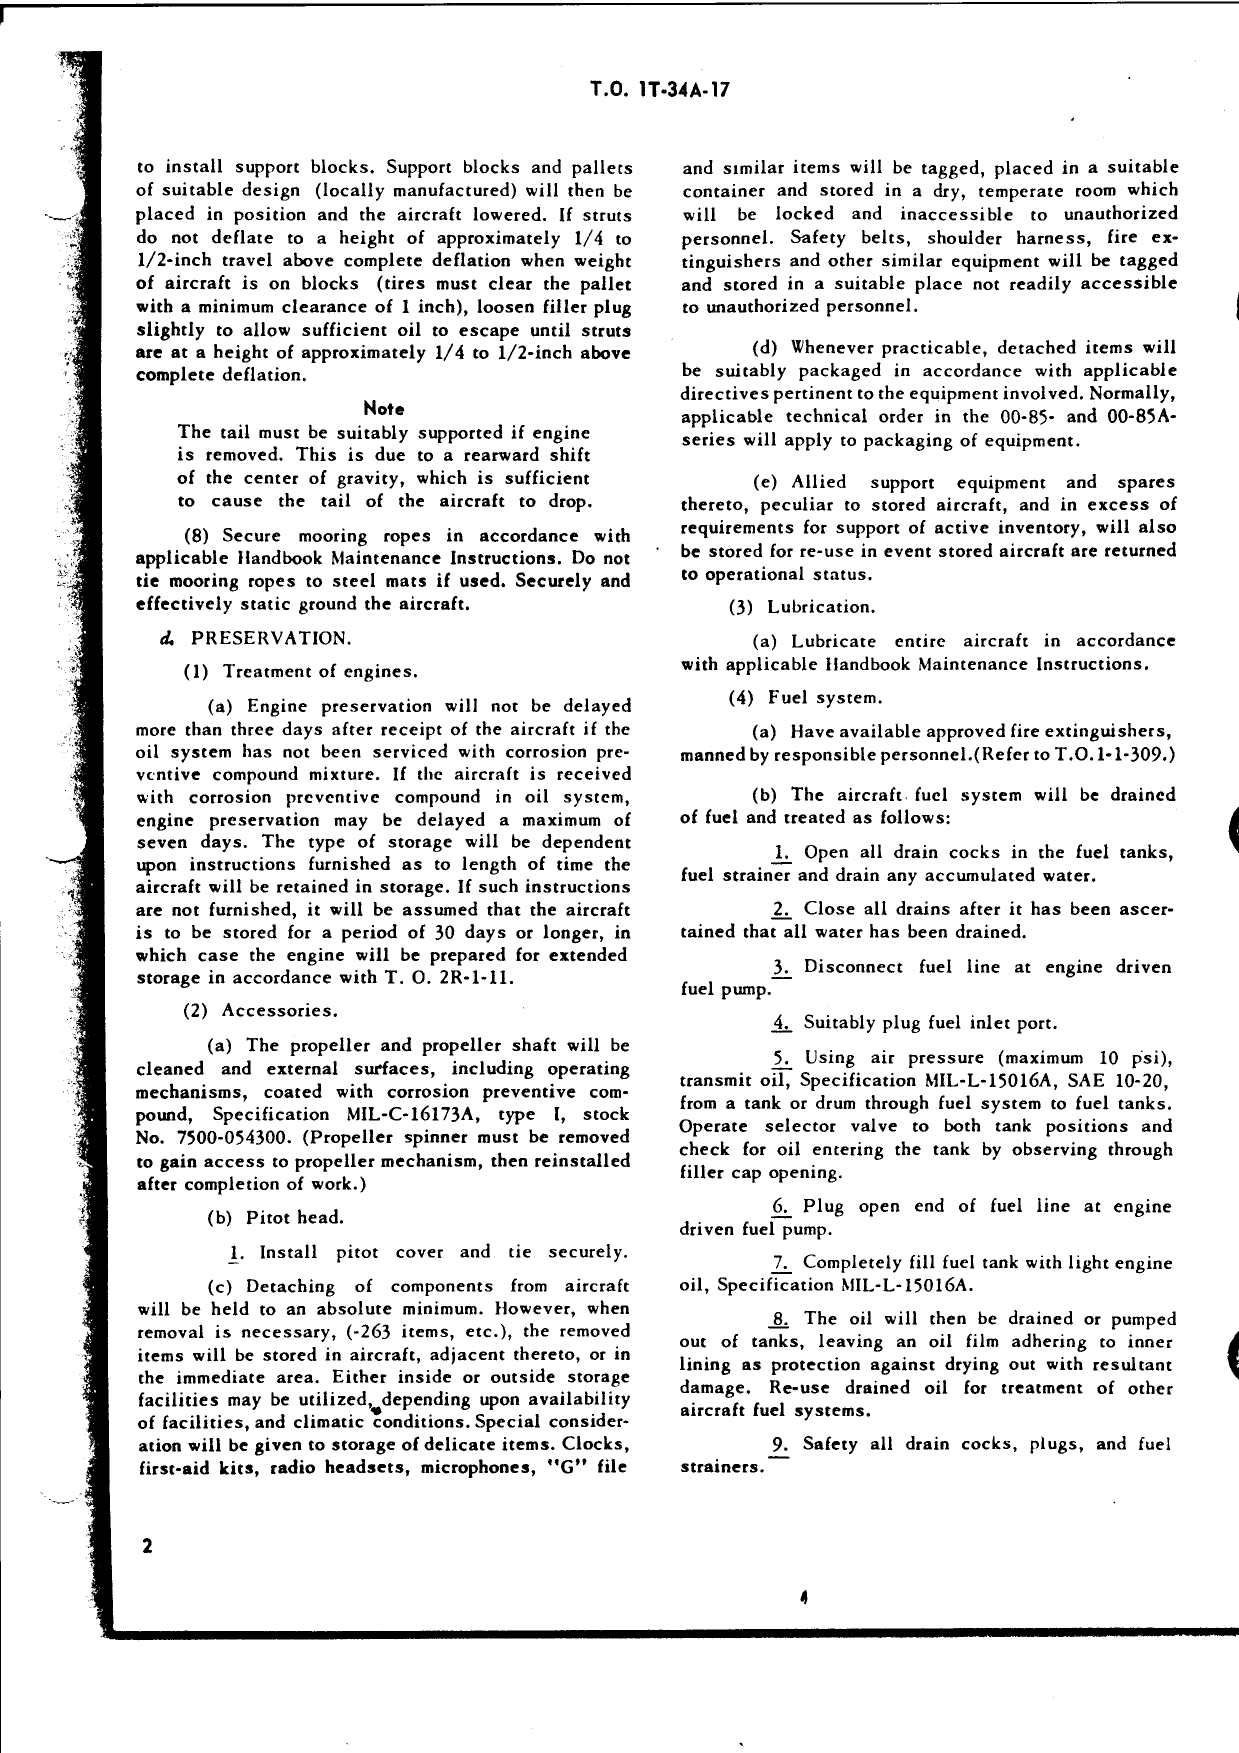 Sample page 4 from AirCorps Library document: Storage Instructions - Storage Instructions of Aircraft T-34 Series